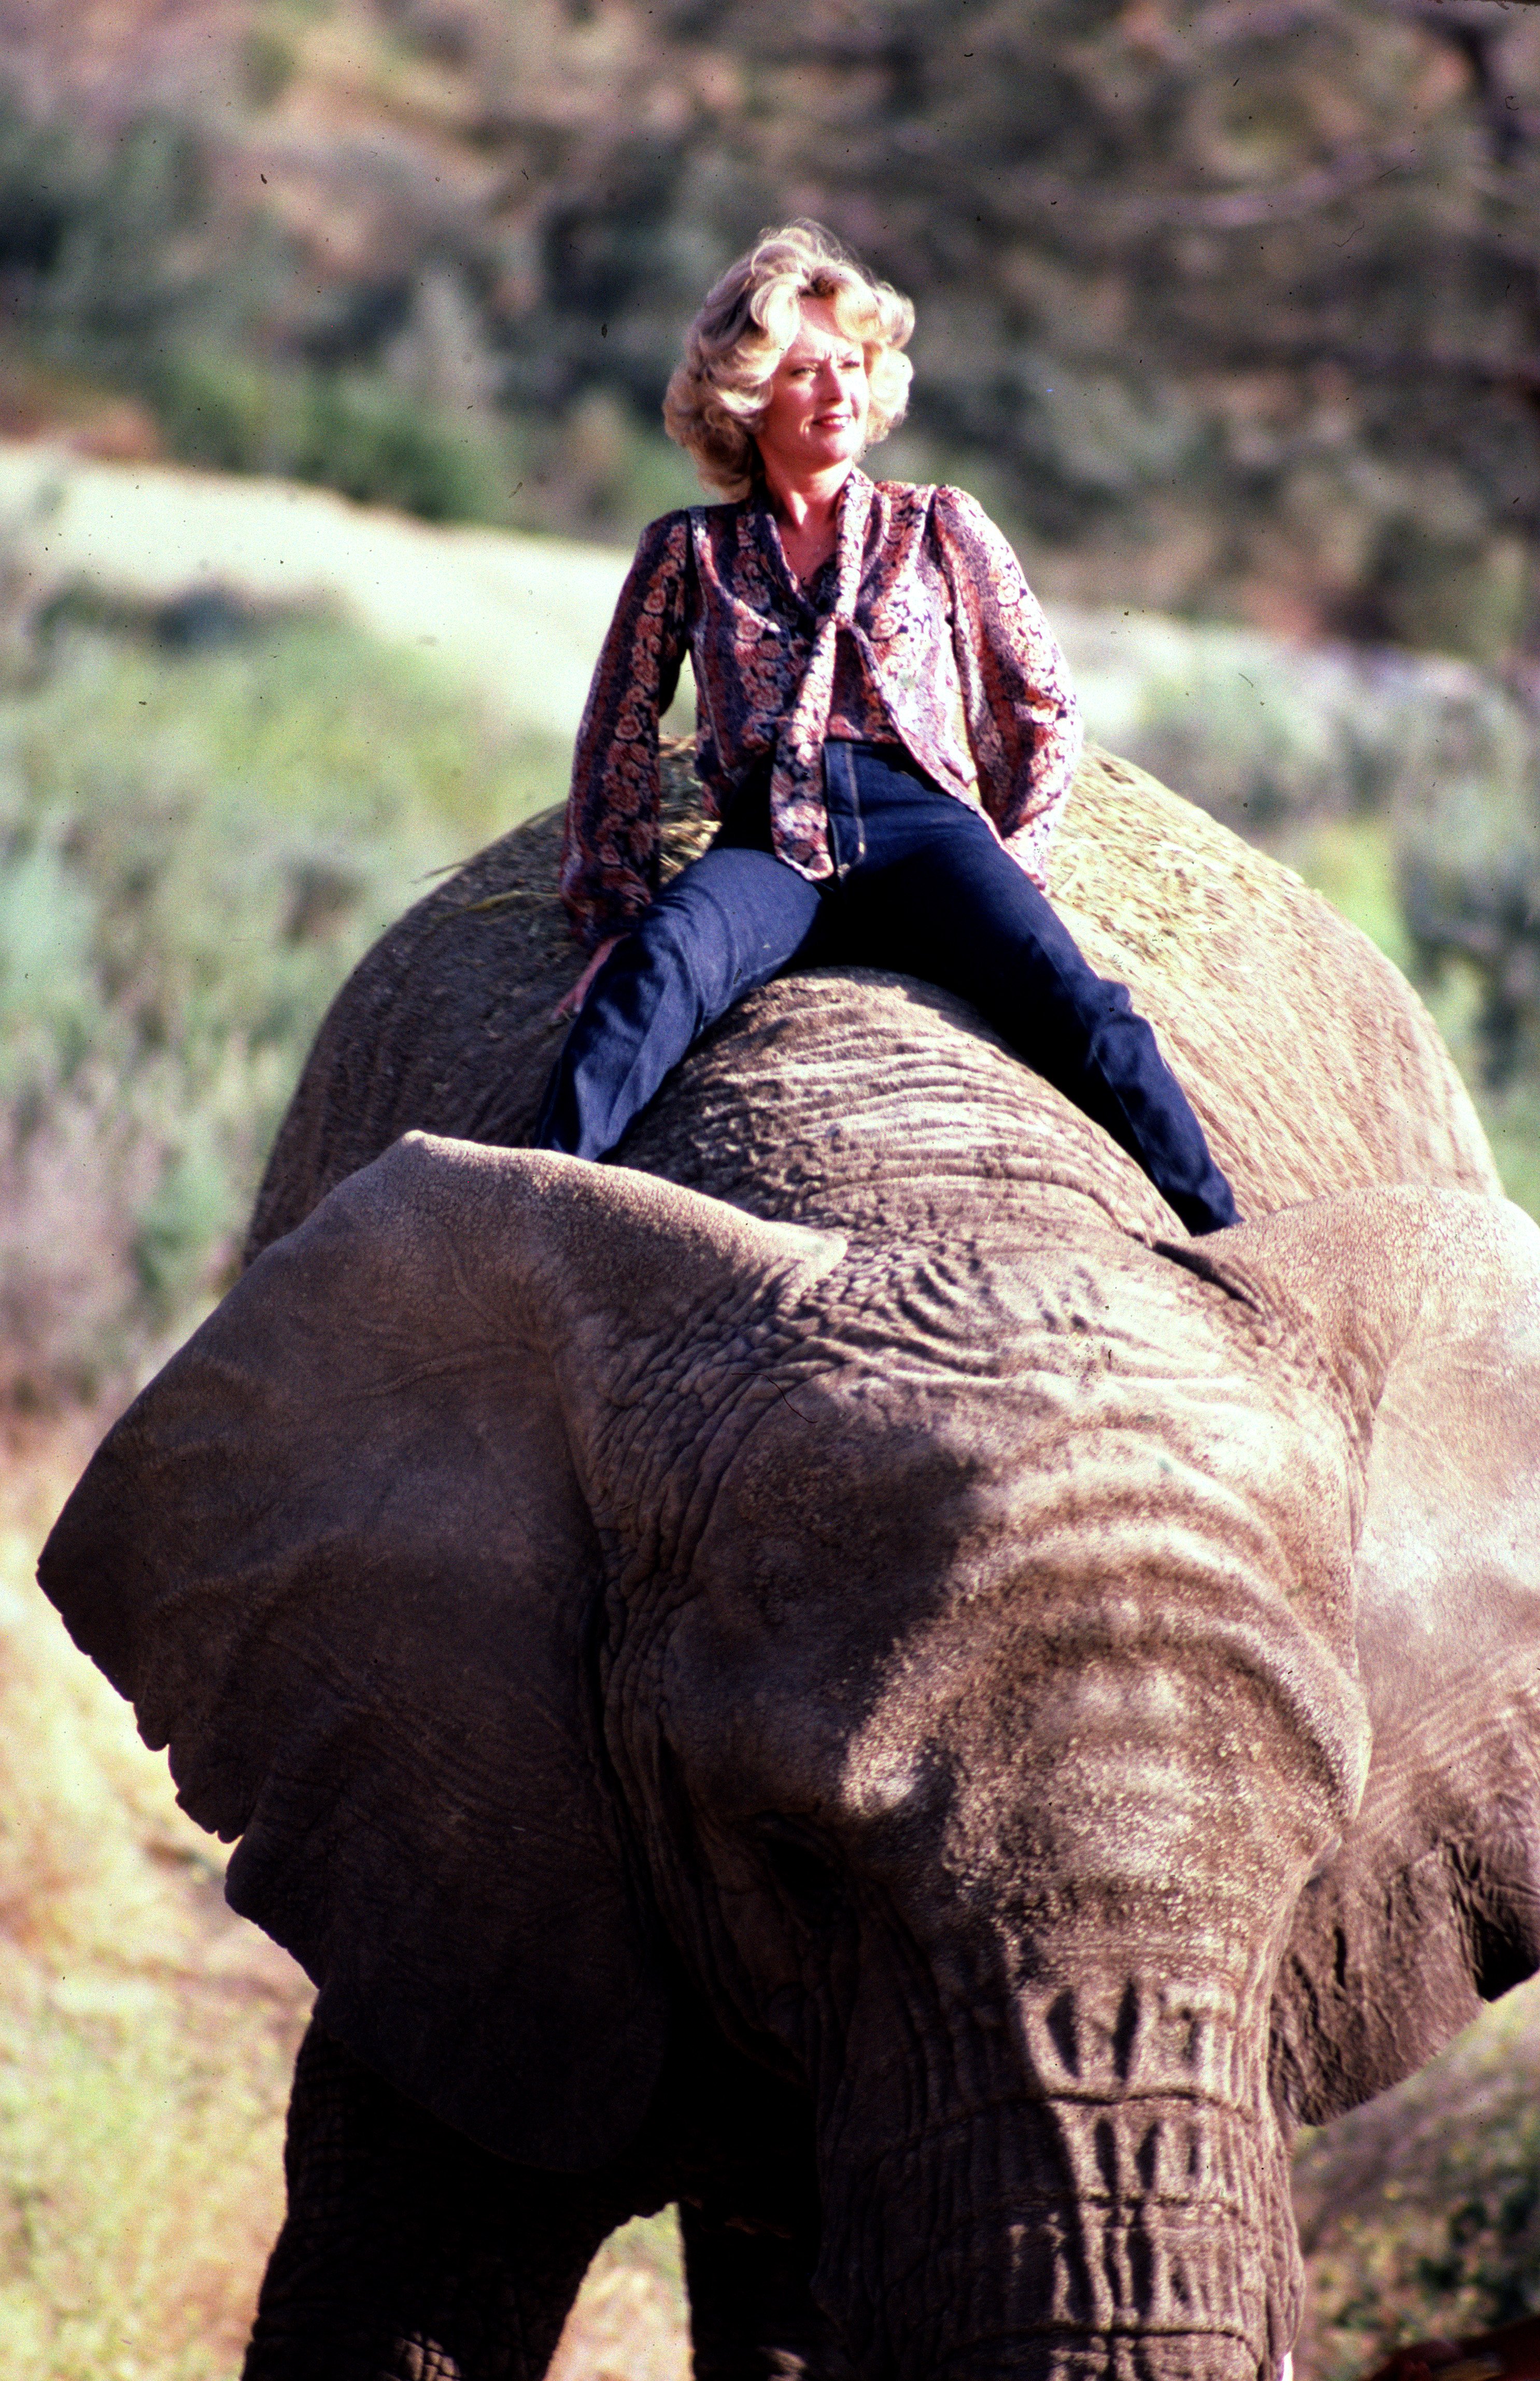 Actress Tippi Hedren, mother of Melanie Griffiths, star of the Alfred Hitchcock horror film The Birds sits astride an Elephant at her Saugus Animal reserve November 17, 1983 | Photo: Getty Images